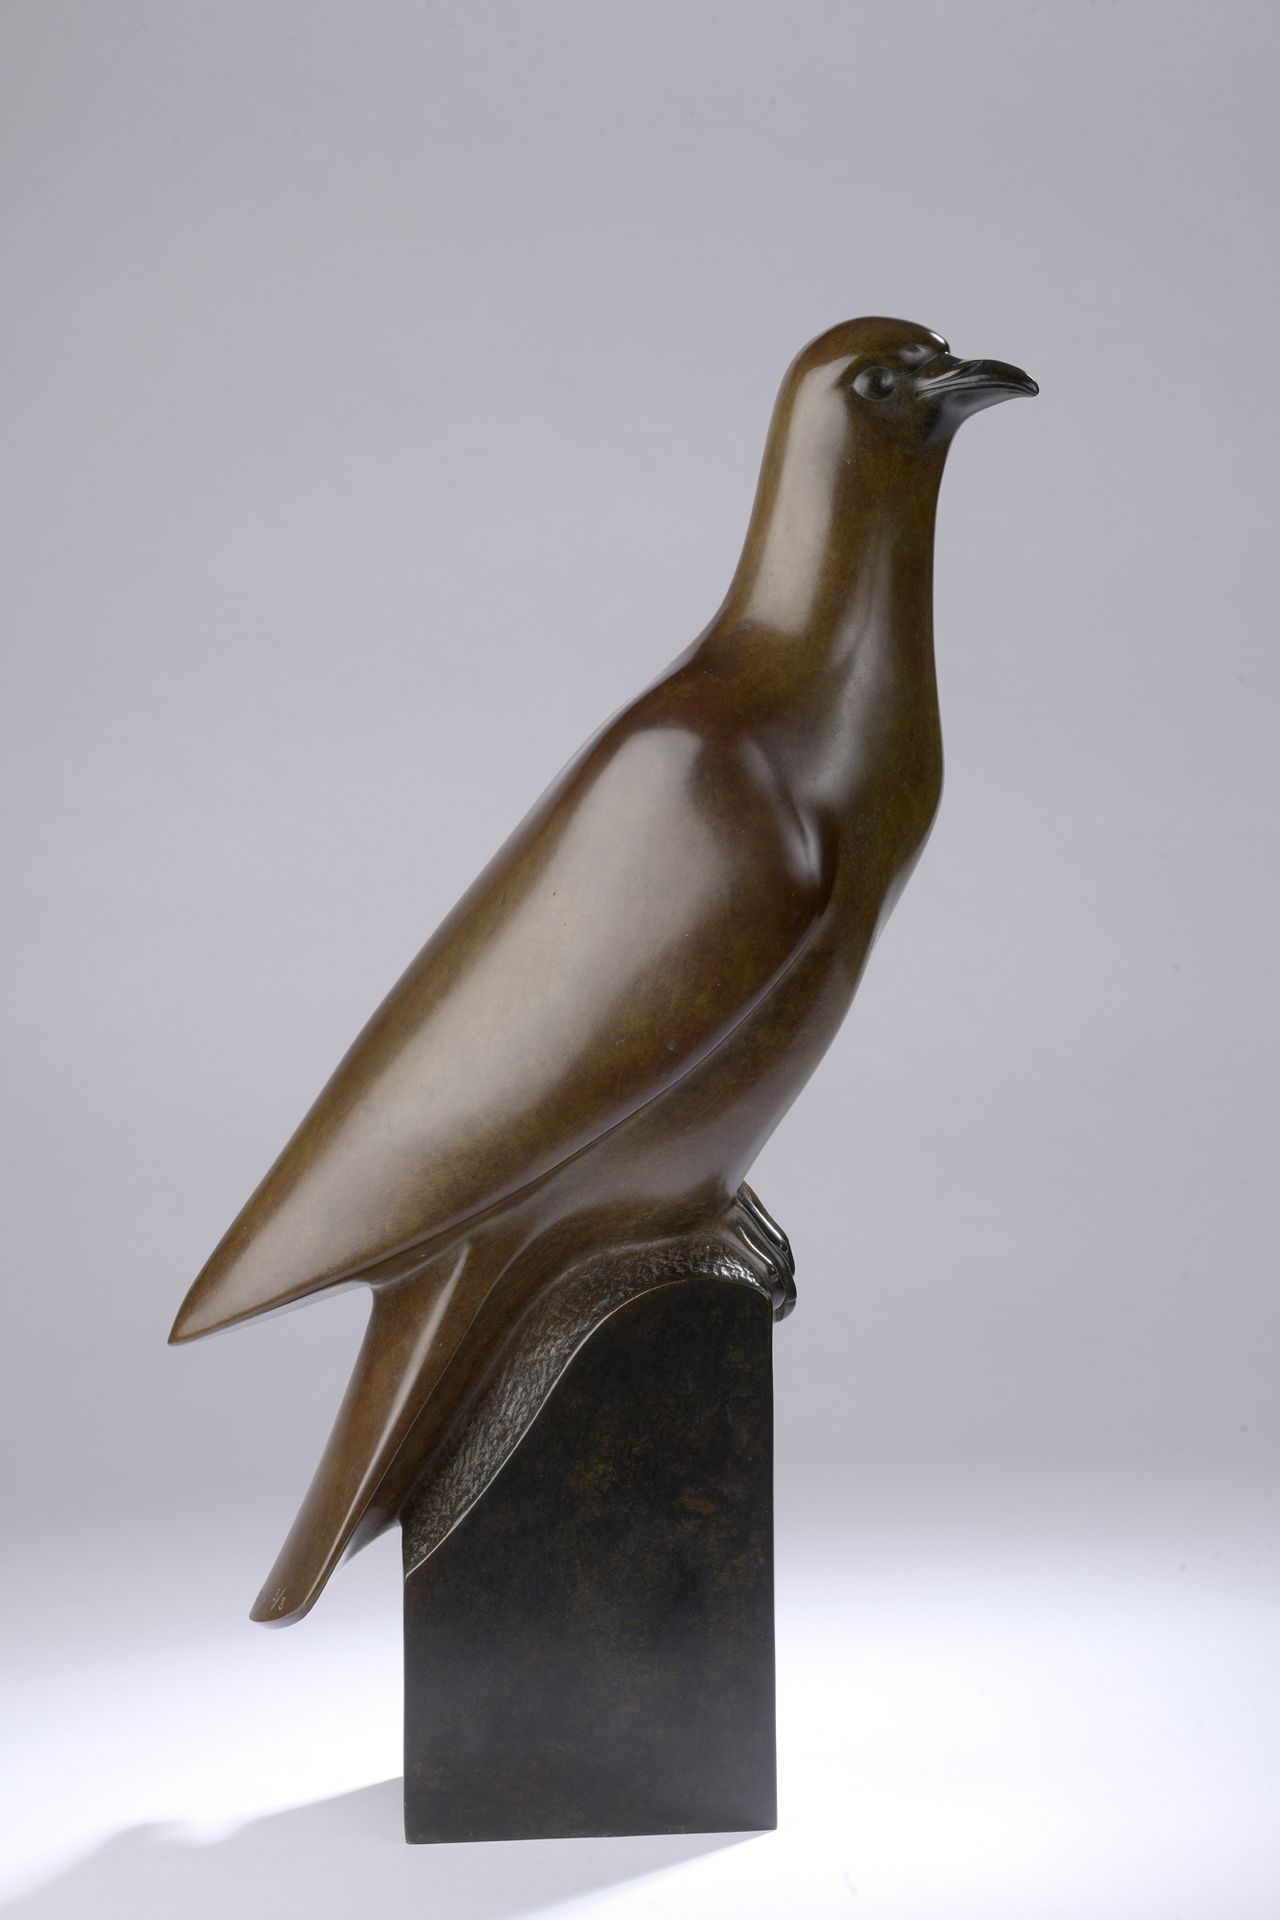 Null François Galoyer (1944)

Young pigeon

Bronze proof with a shaded brown-gre&hellip;